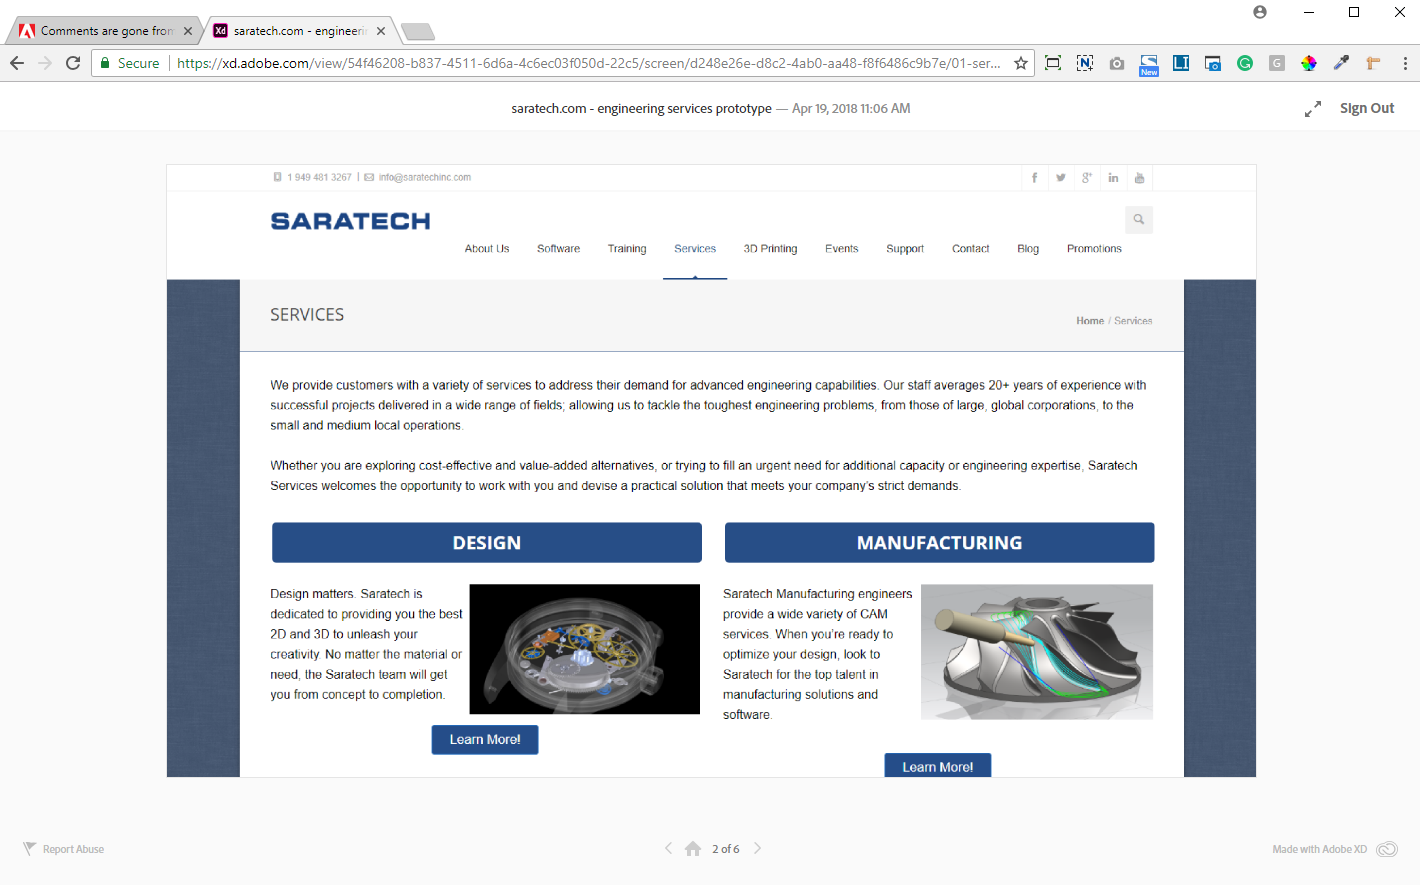 saratech.com - engineering services prototype - Google Chrome 2018-05-03 07.58.42.png